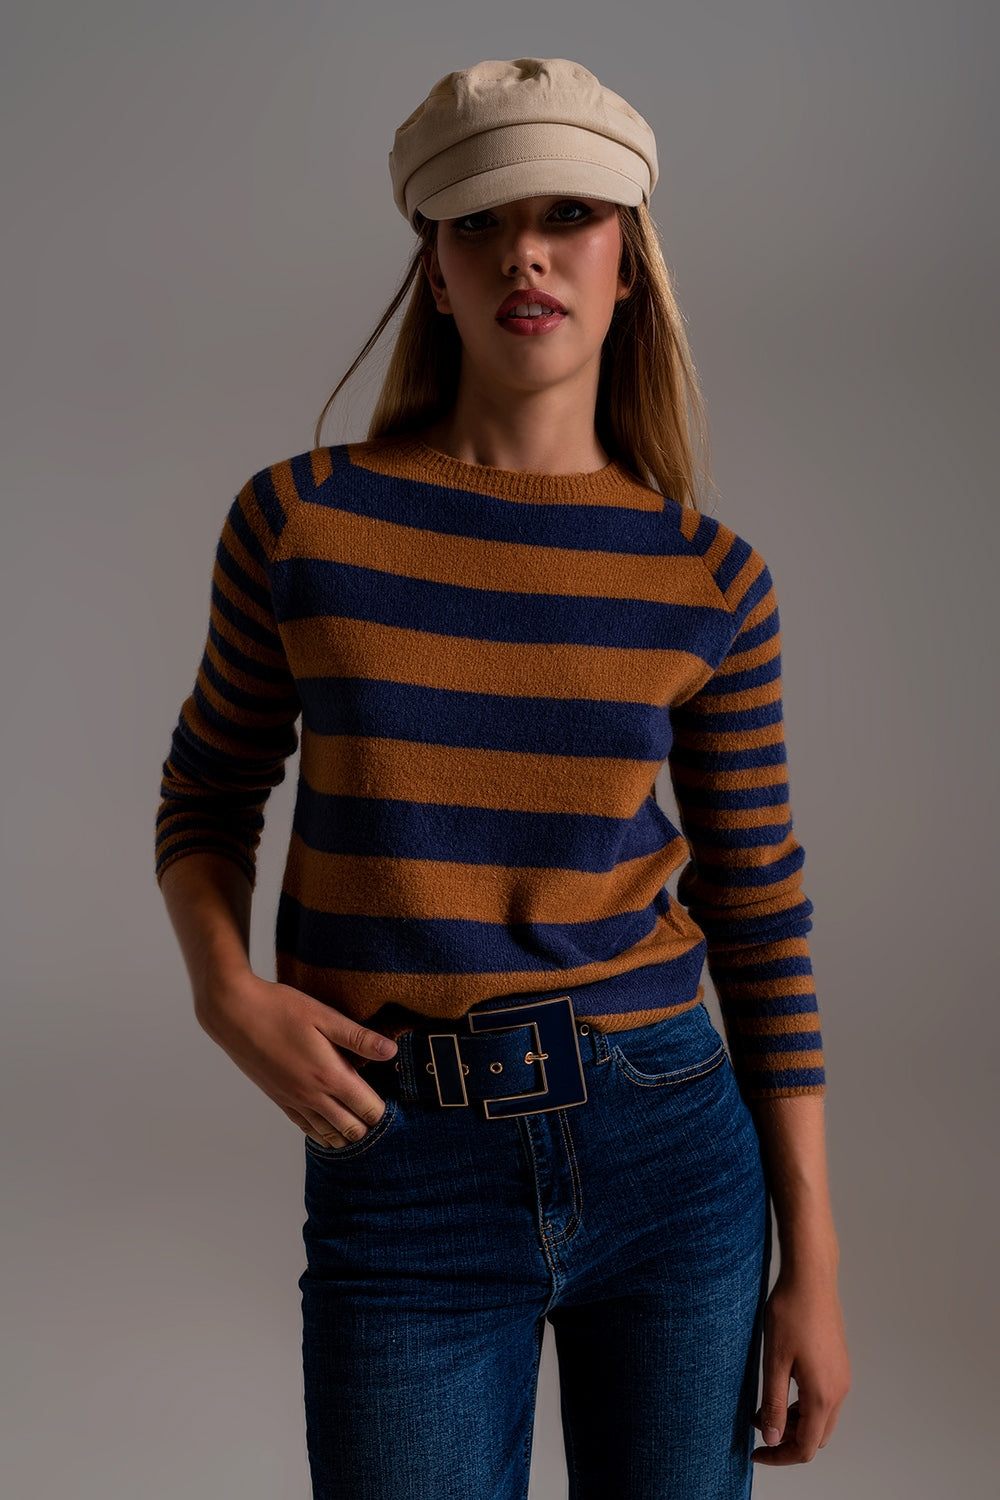 Q2 Crew Neck Light Sweater in Camel and Blue Stripes